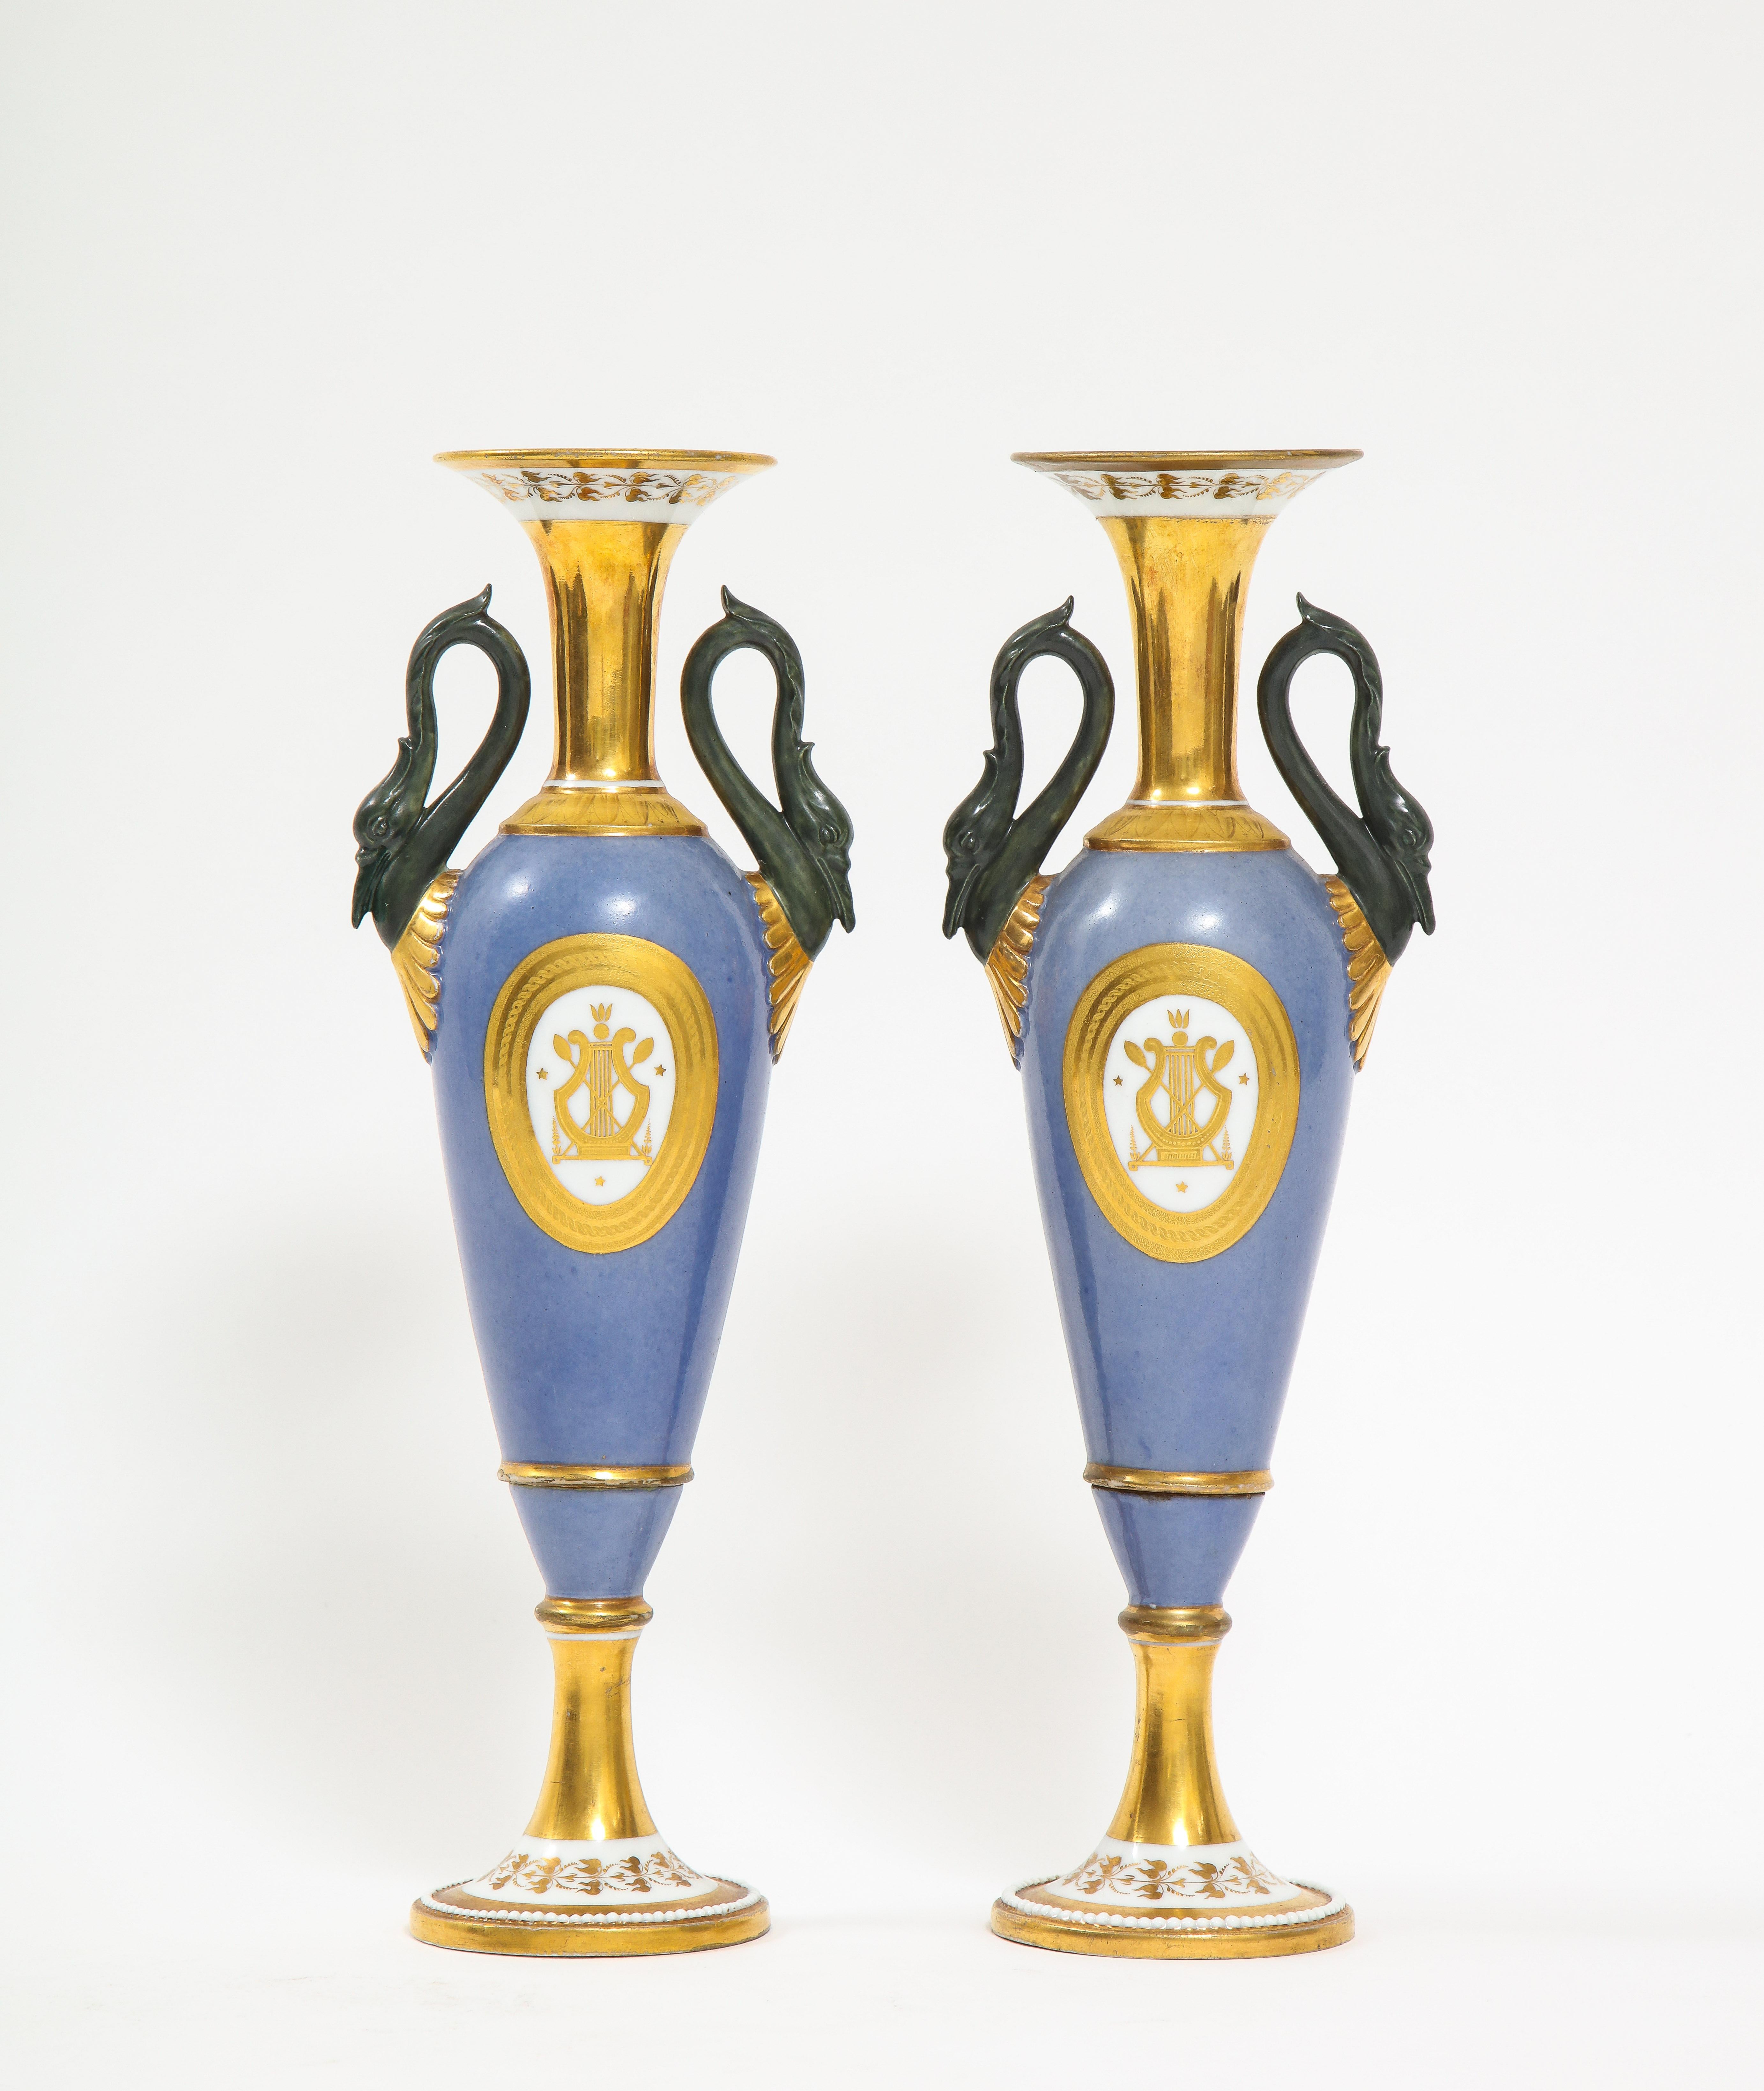 A fine pair of French 19th century Empire Period Old Paris Porcelain swan handle vases. Each is beautifully hand-painted with a light blue colored ground and further adorned with 24K gold-painted accents around the neck, handles, bases, and center